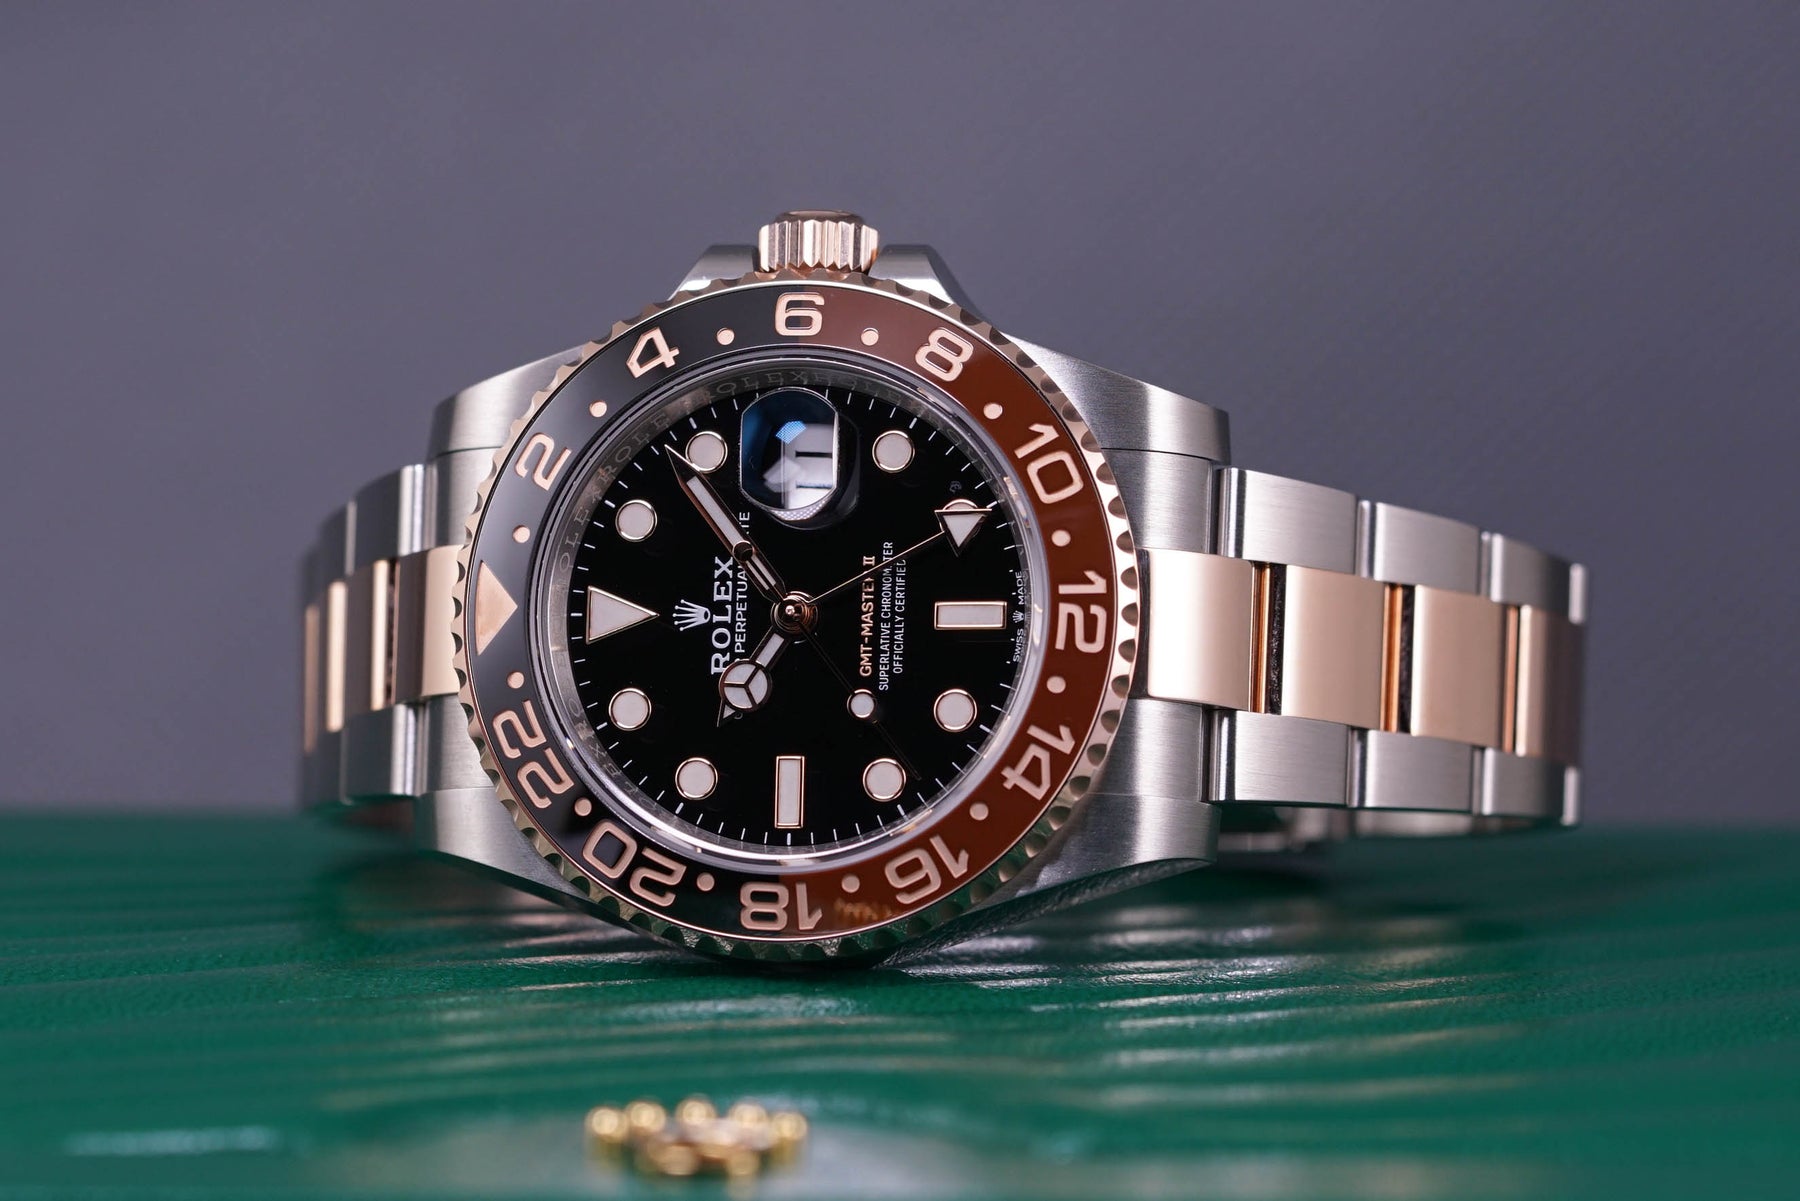 GMT MASTER-II ROOTBEER TWOTONE ROSEGOLD